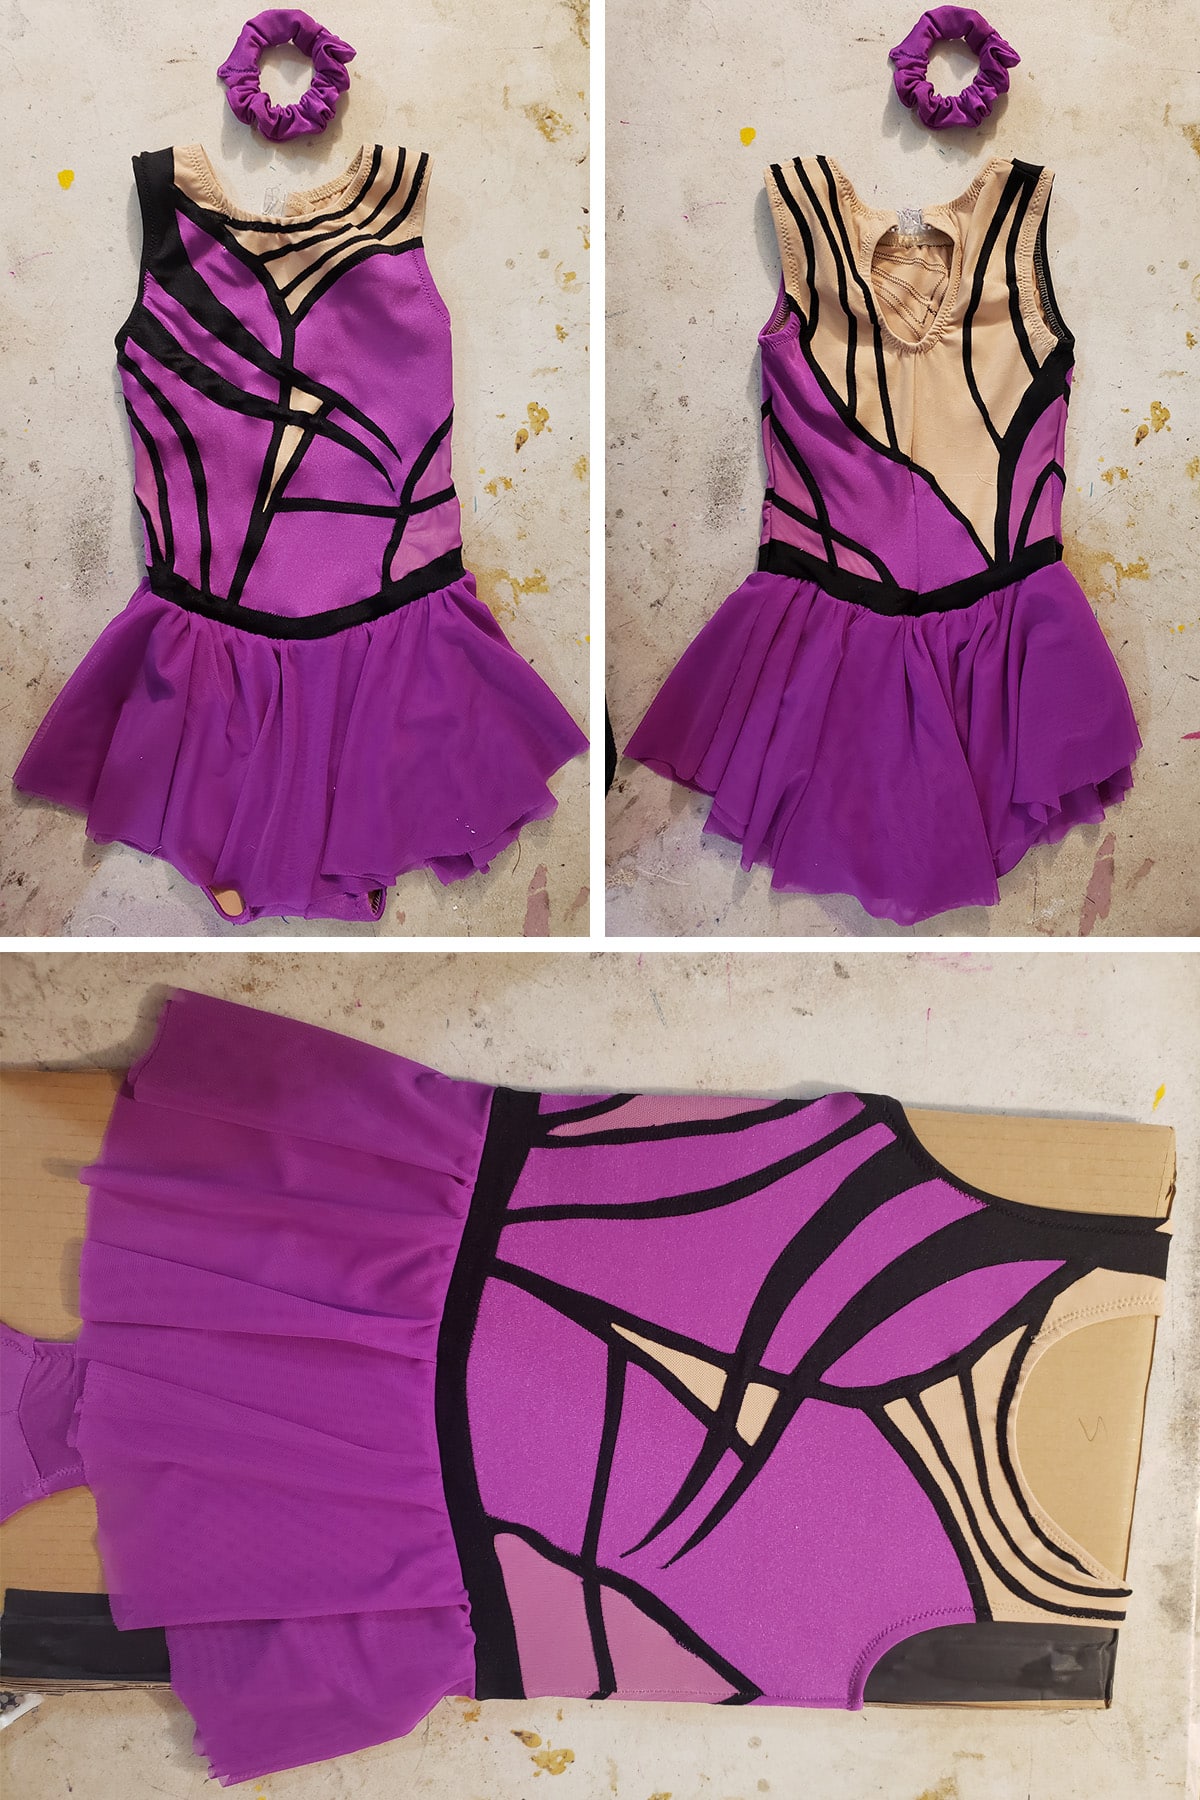 A small, purple version of the skating dress in this post is shown stretched over a piece of cardboard.